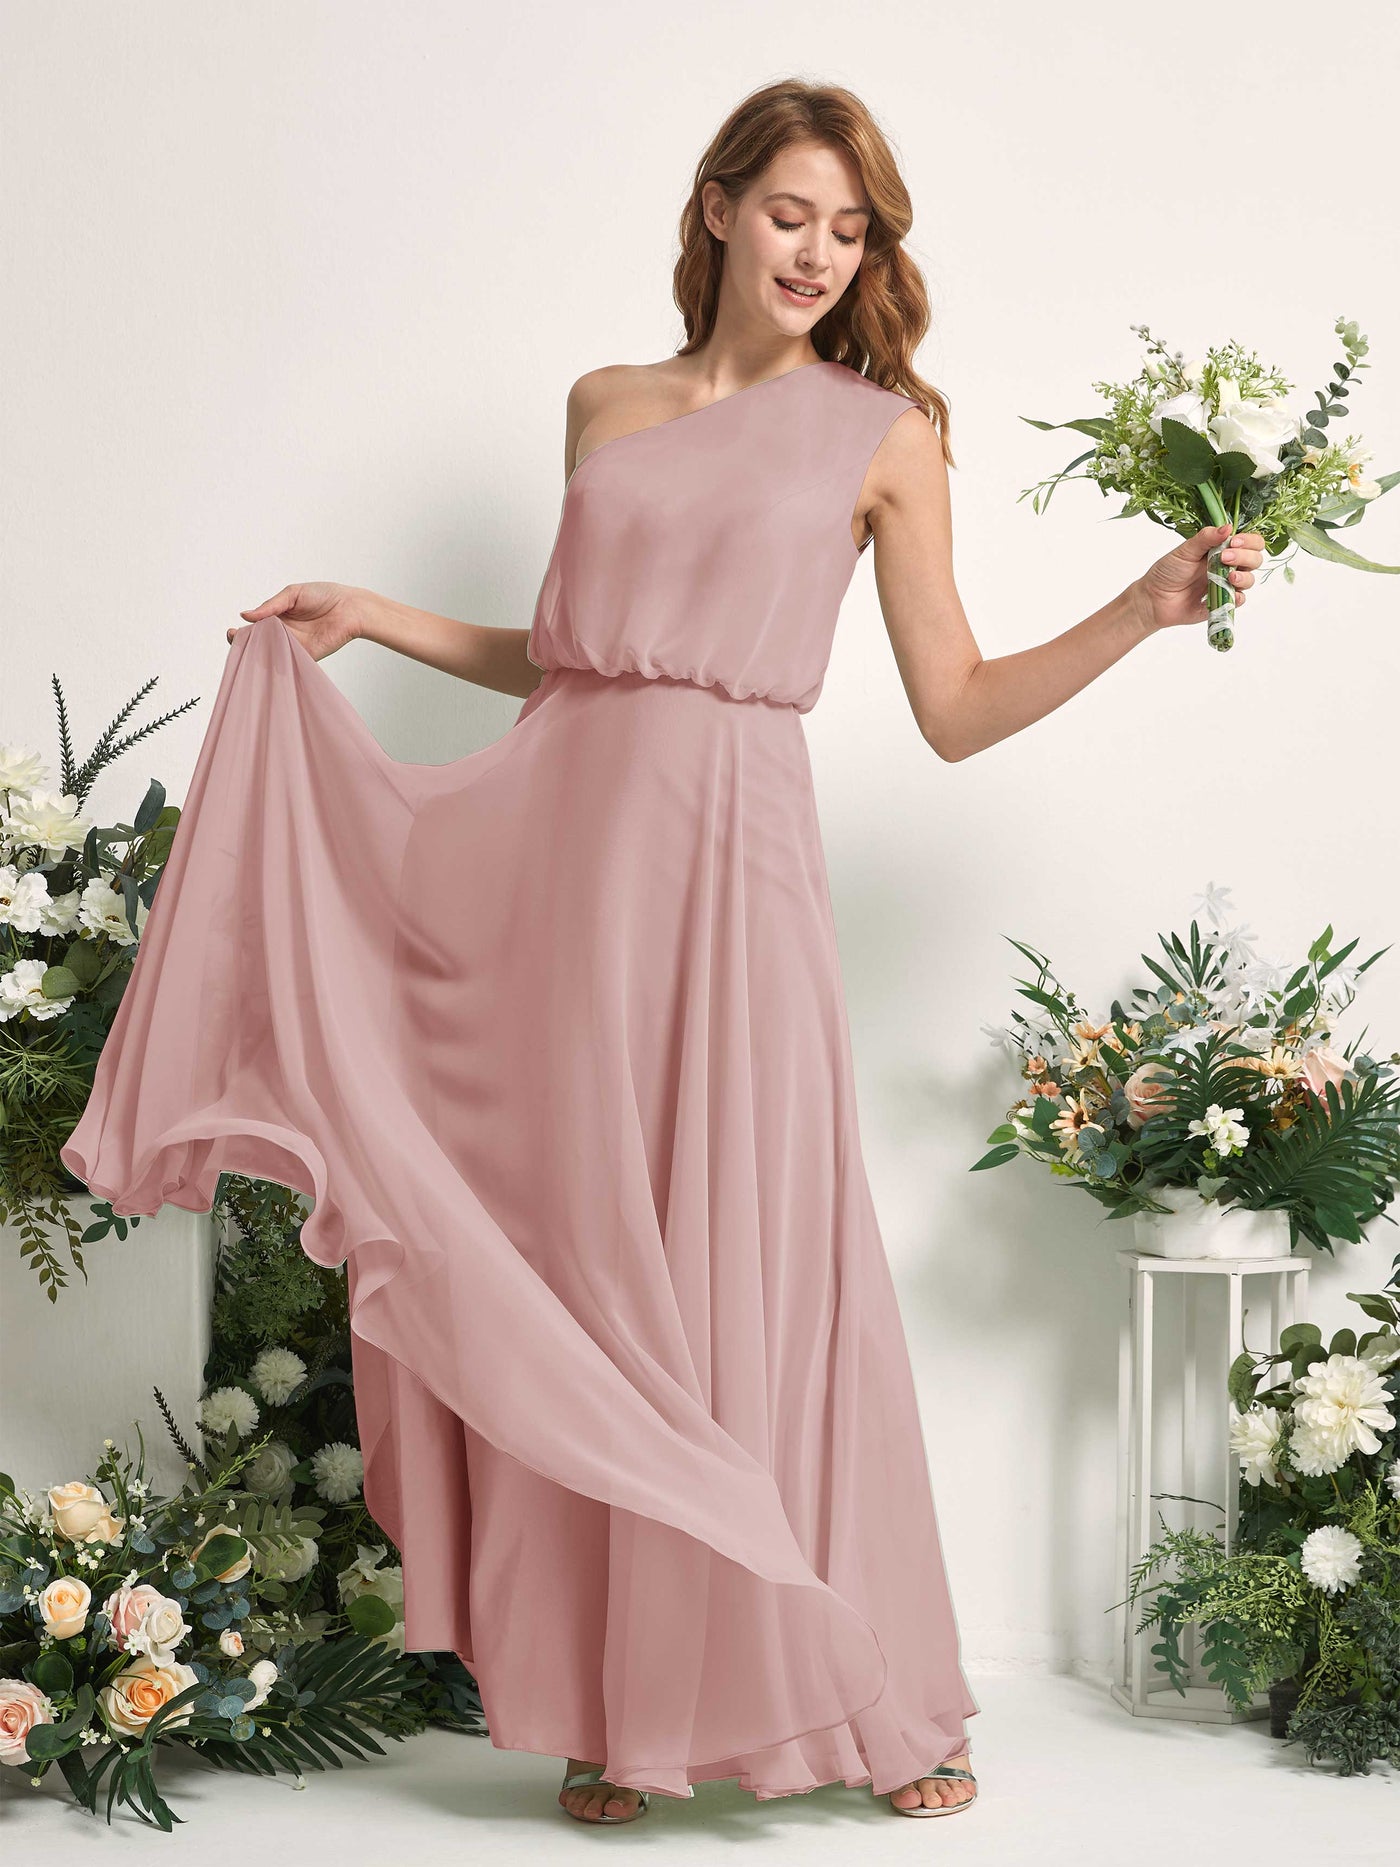 Bridesmaid Dress A-line Chiffon One Shoulder Full Length Sleeveless Wedding Party Dress - Dusty Rose (81226809)#color_dusty-rose